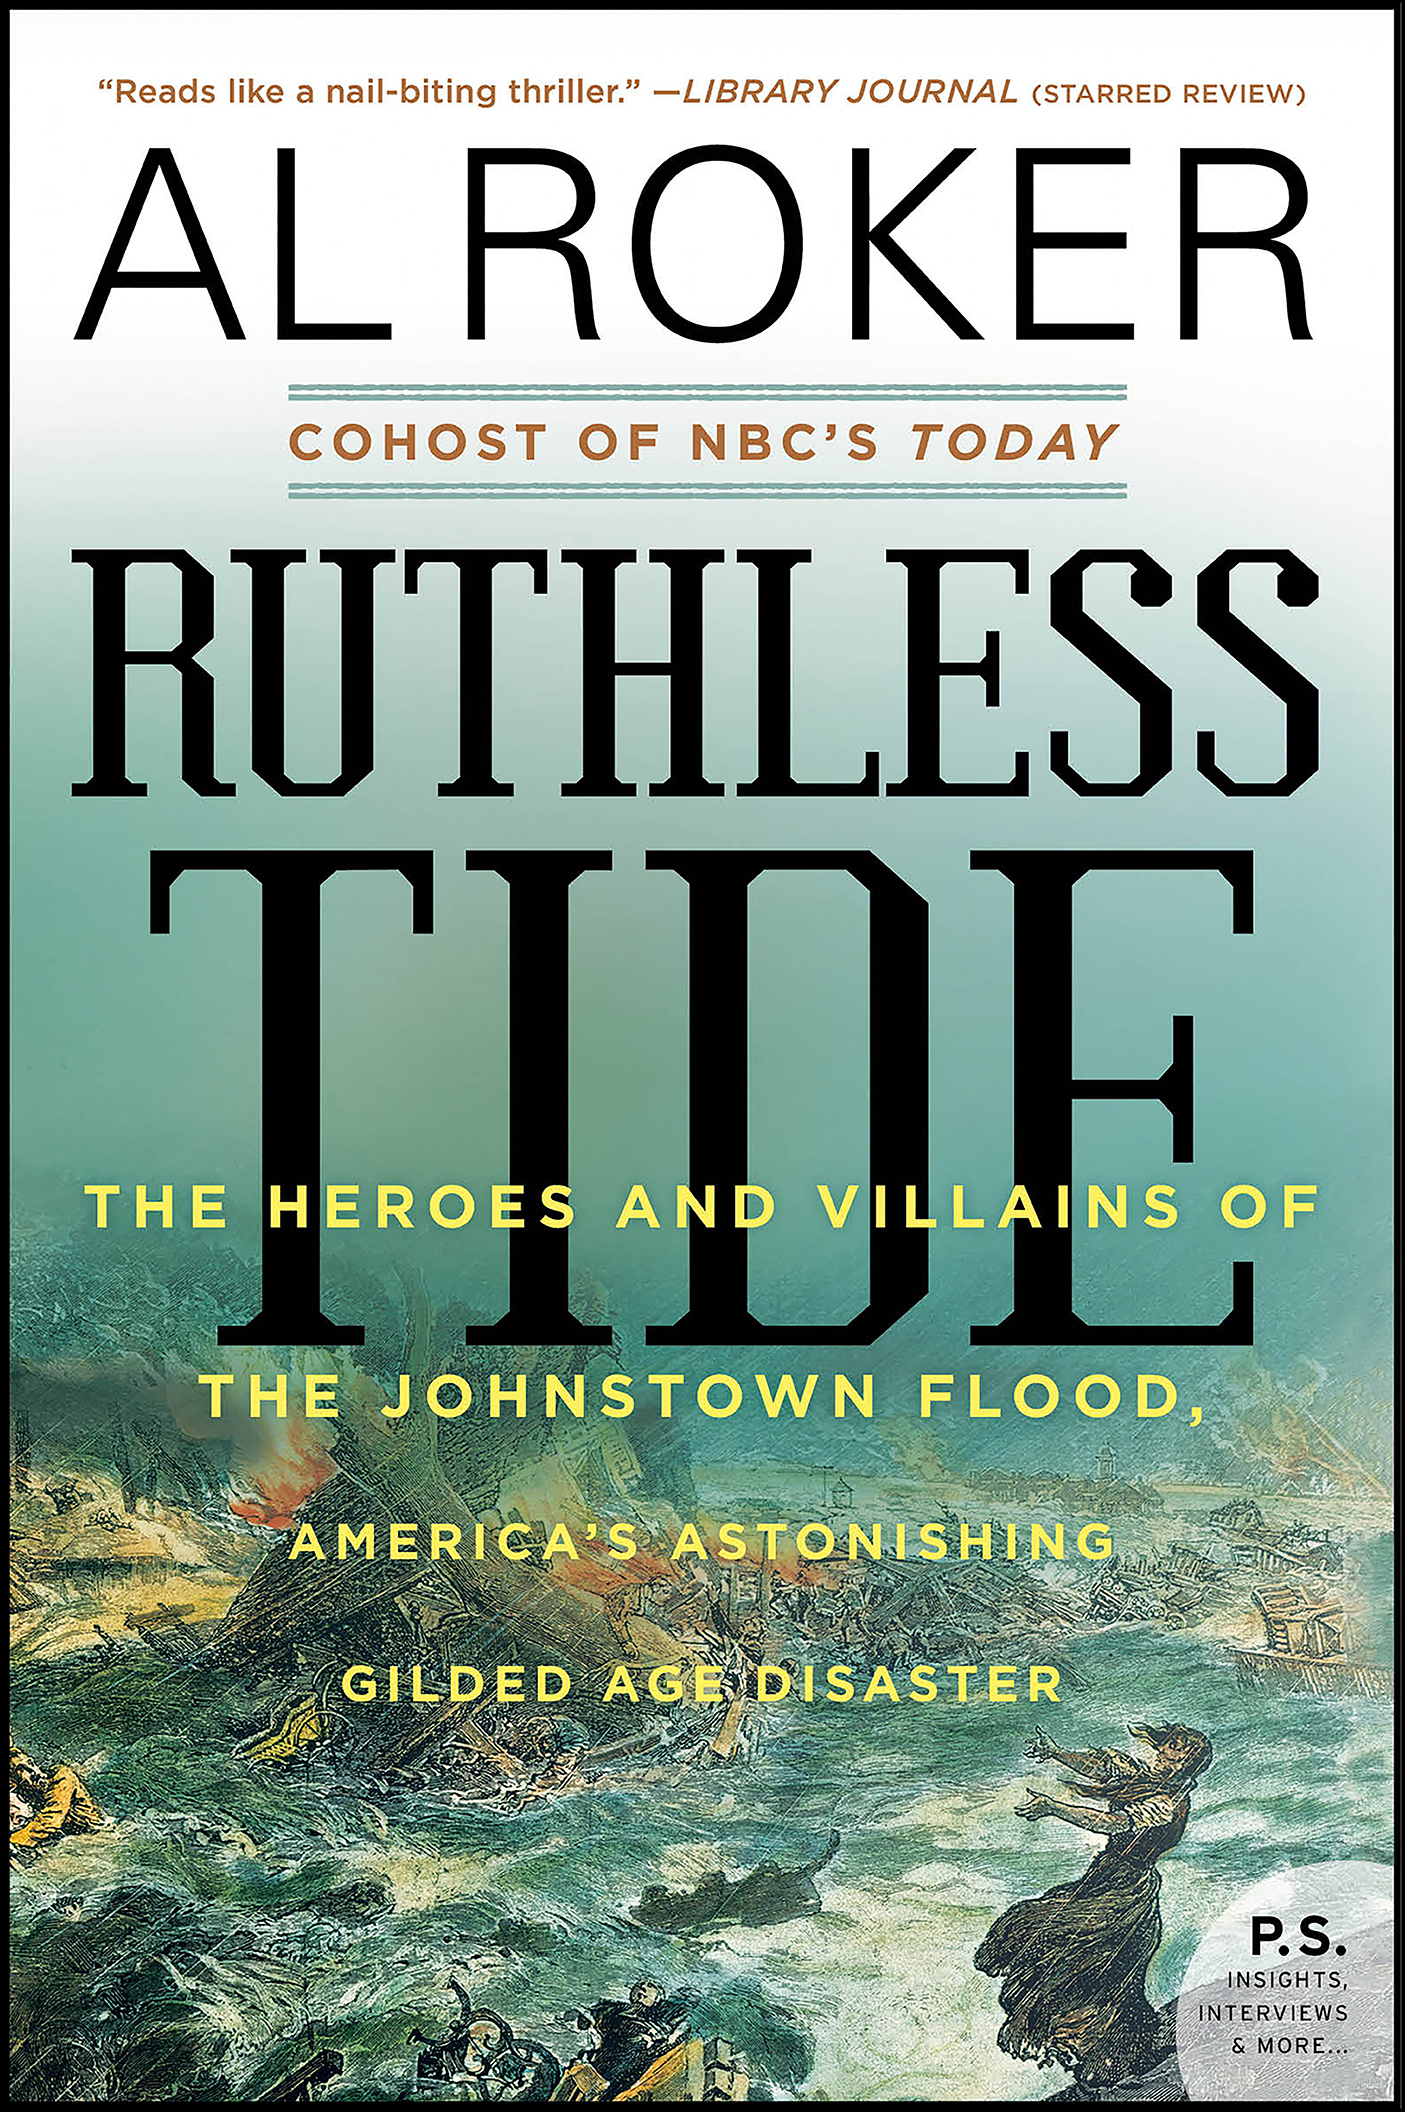 Ruthless tide the heroes and villains of the Johnstown flood, America's astonishing gilded age disaster cover image